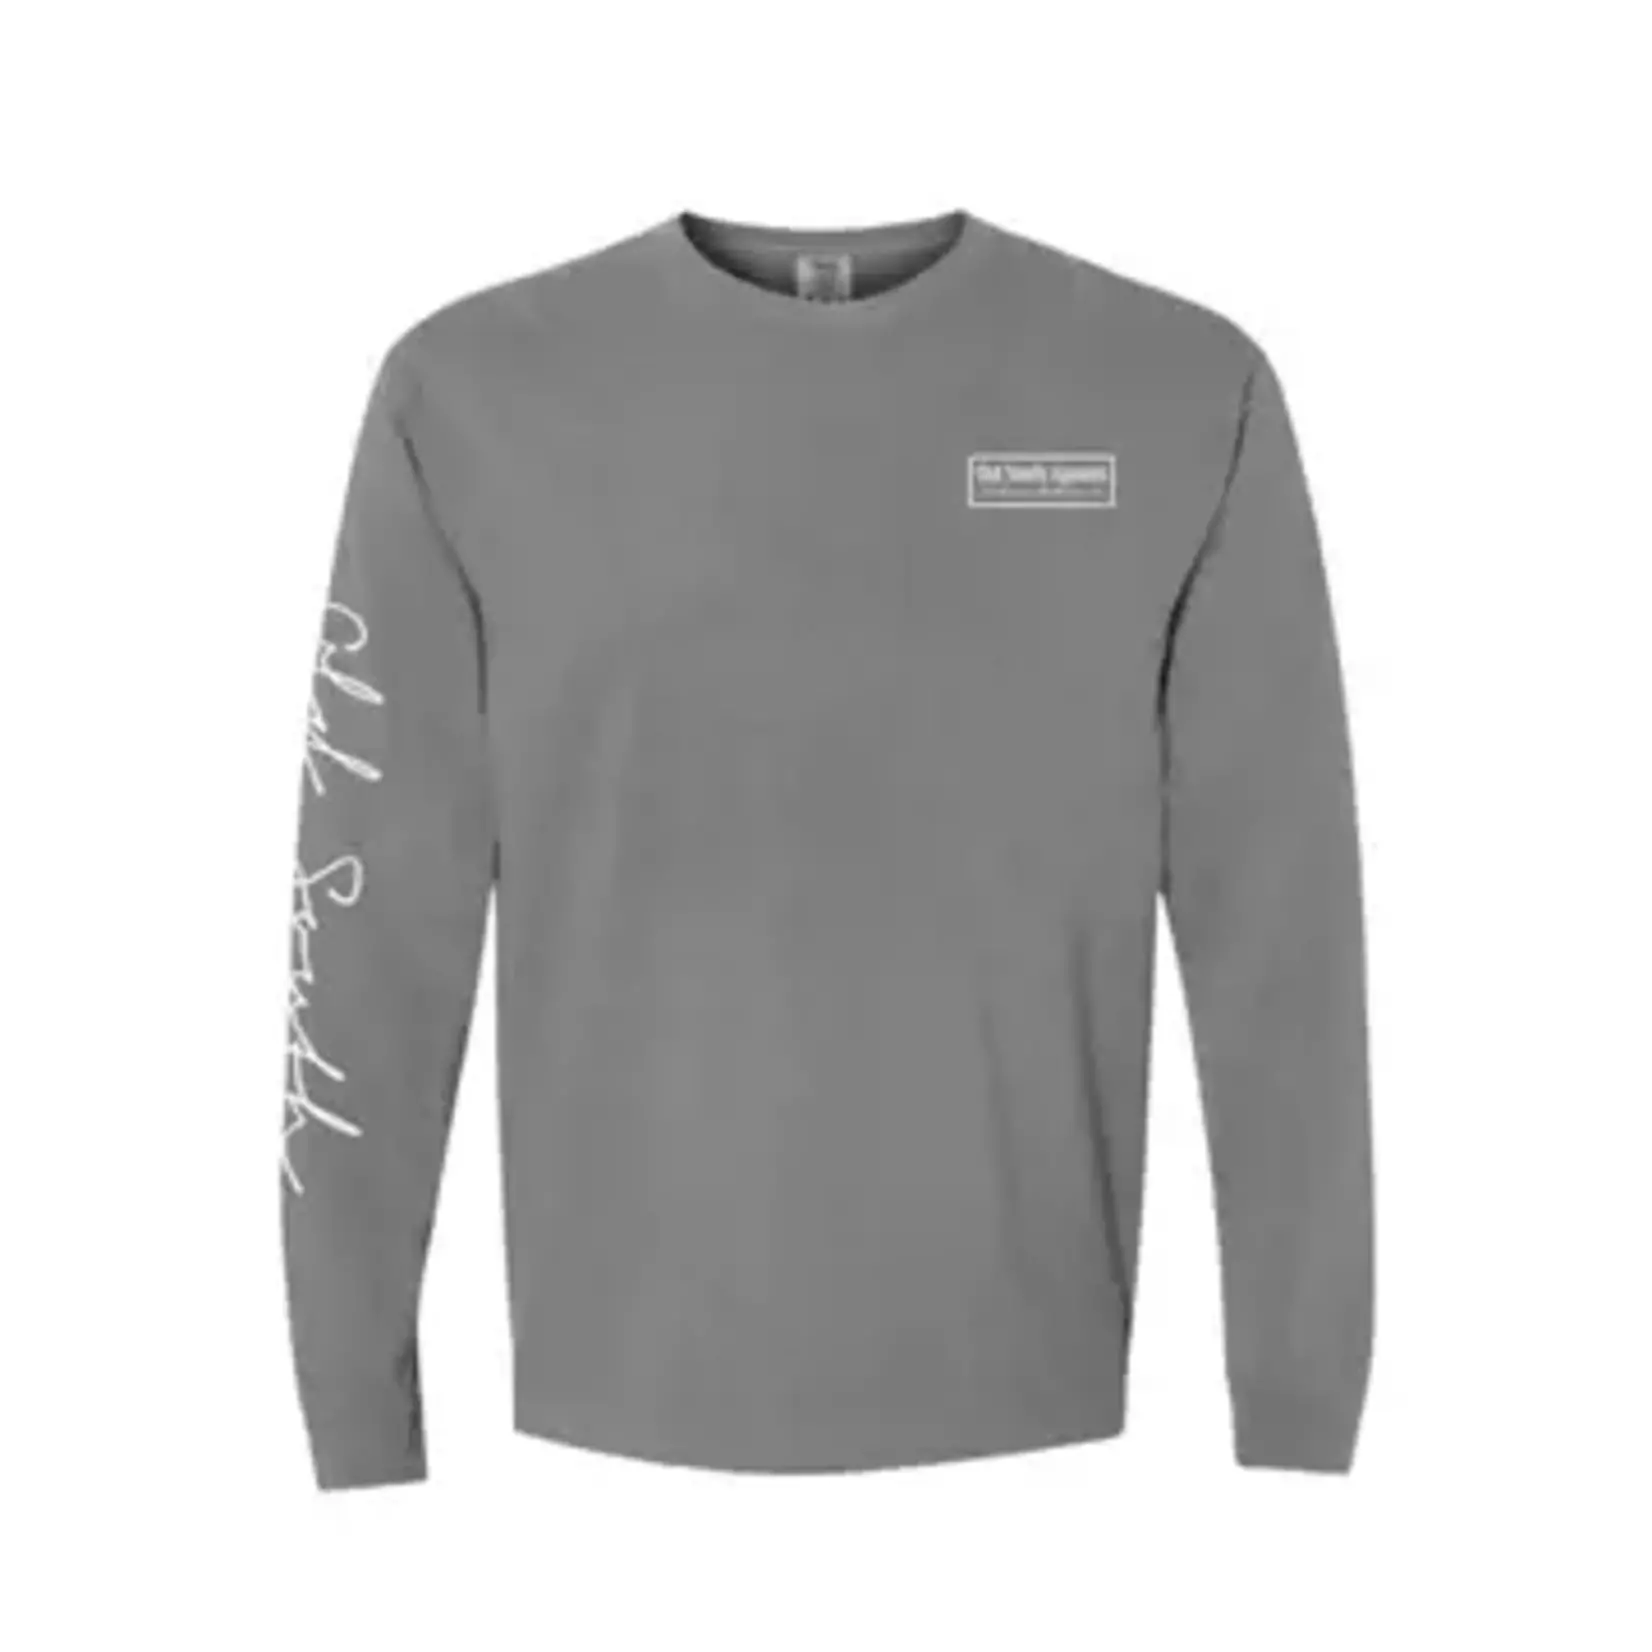 Old South Football Grip L/S Tee